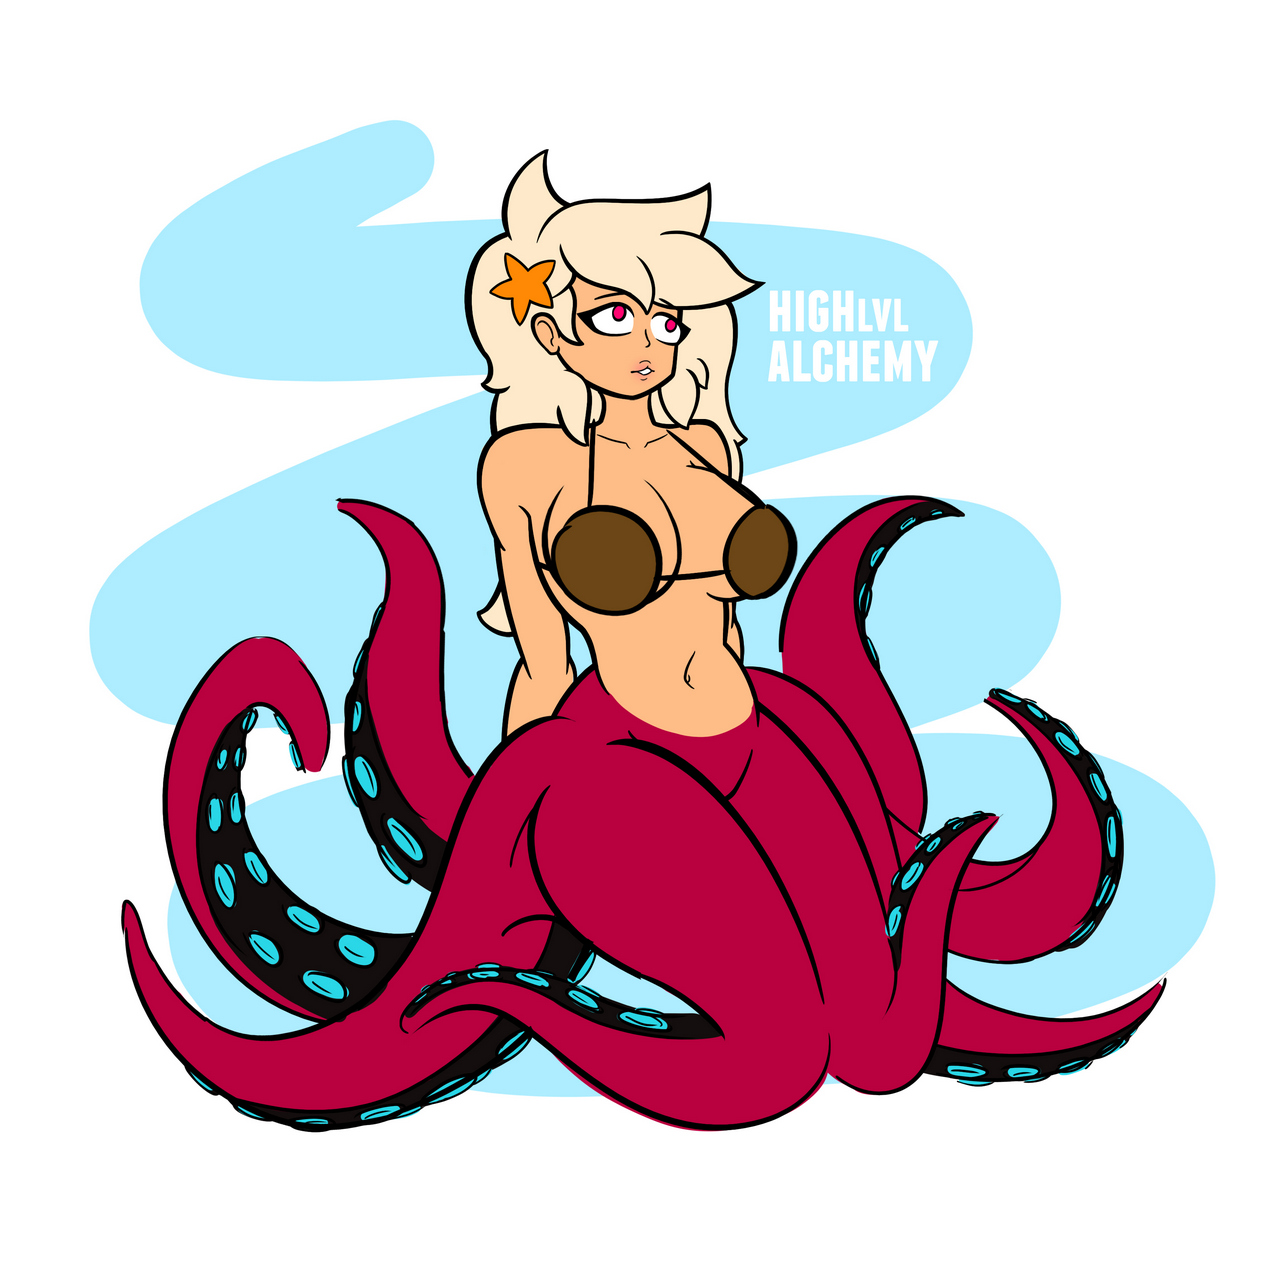 My Own Octopus Girl Based Off A Coconut Octopus Highlvlalchemy O